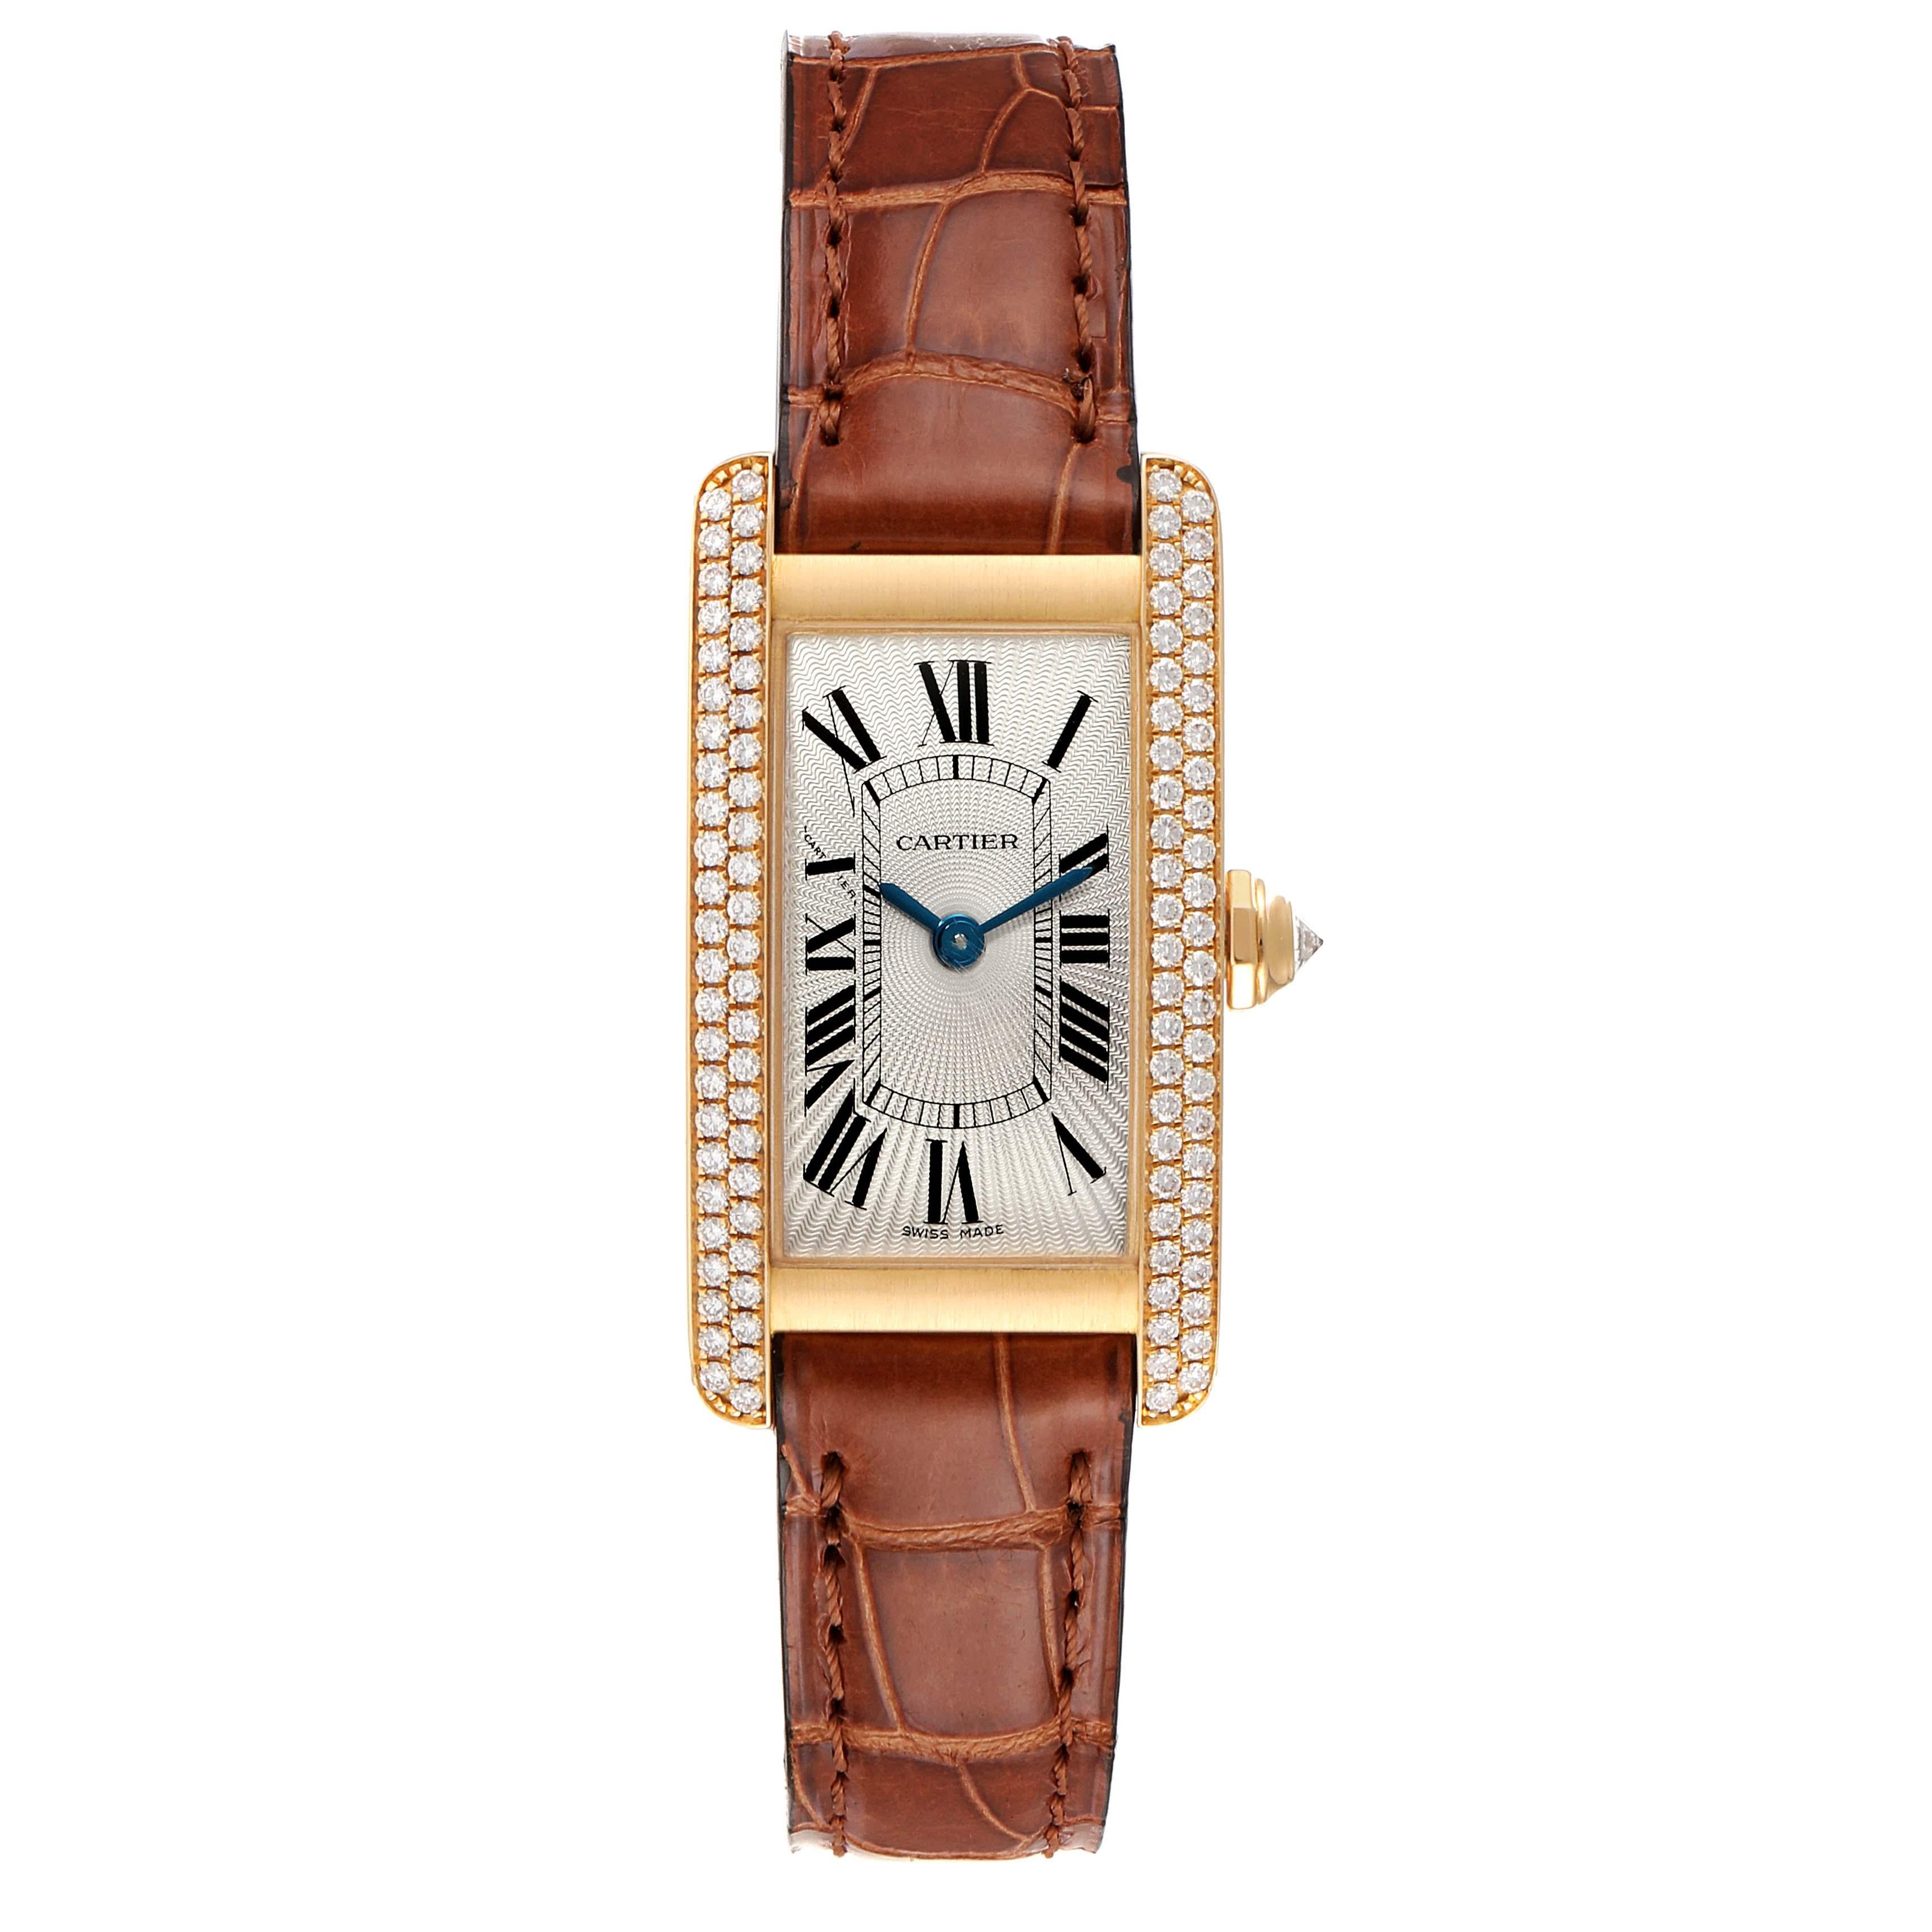 Cartier Tank Americaine Yellow Gold Diamond Ladies Watch WB701251 Box. Quartz movement. 18K yellow gold case 19.0 x 35.0 mm. Circular grained crown set with faceted diamond. . Scratch resistant sapphire crystal. Silver dial with black roman numeral